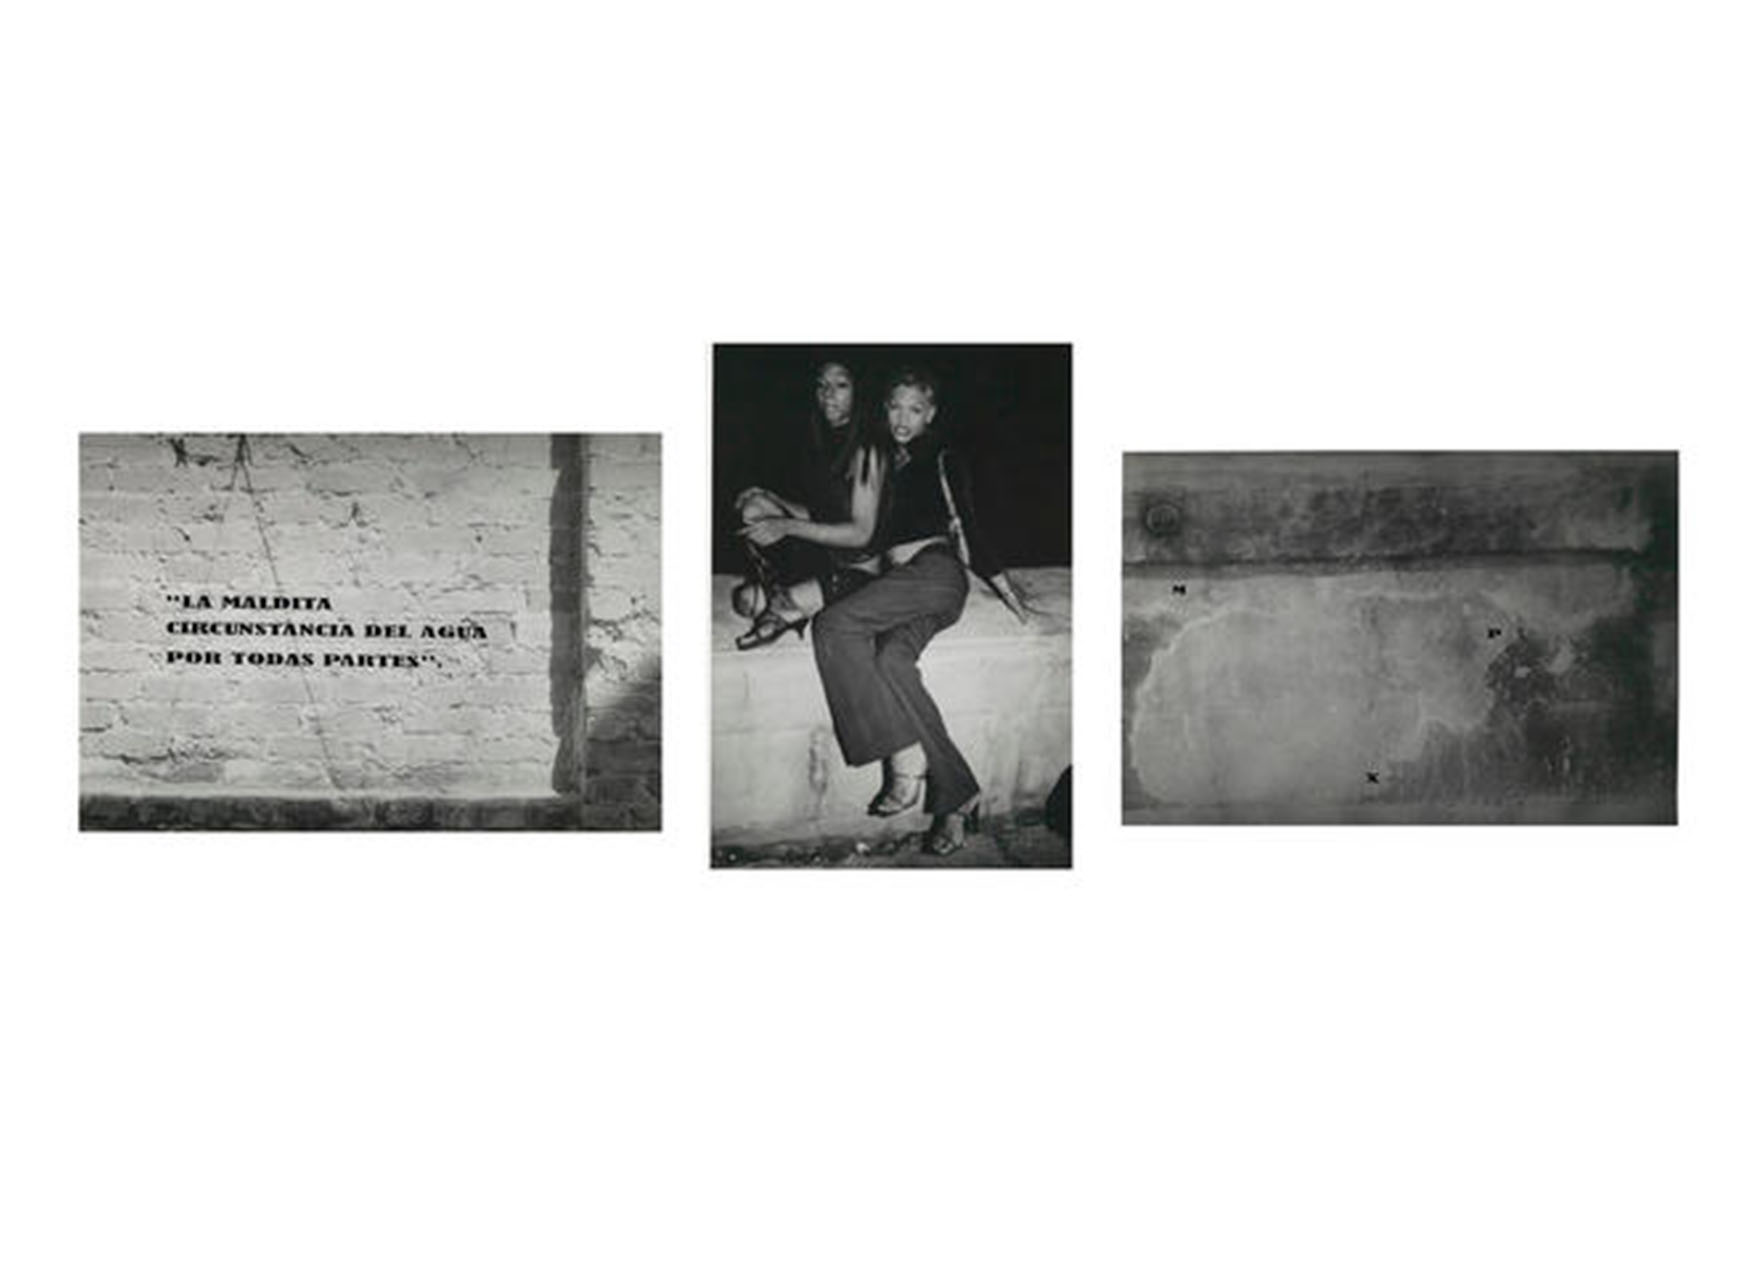 left: brick wall with indentation and applied text: 'LA MALDITA / CIRCUNSTANCIA DEL AGUA / POR TODAS PARTES". middle: night, outdoors, two figures sitting on low concrete wall posing for the camera, one with legs folded, short skirt, top and heeled sandals, other with slacks, short top, purse and heeled sandals. right: concrete wall with applied text M at upper left, P and mid-right, X at lower center